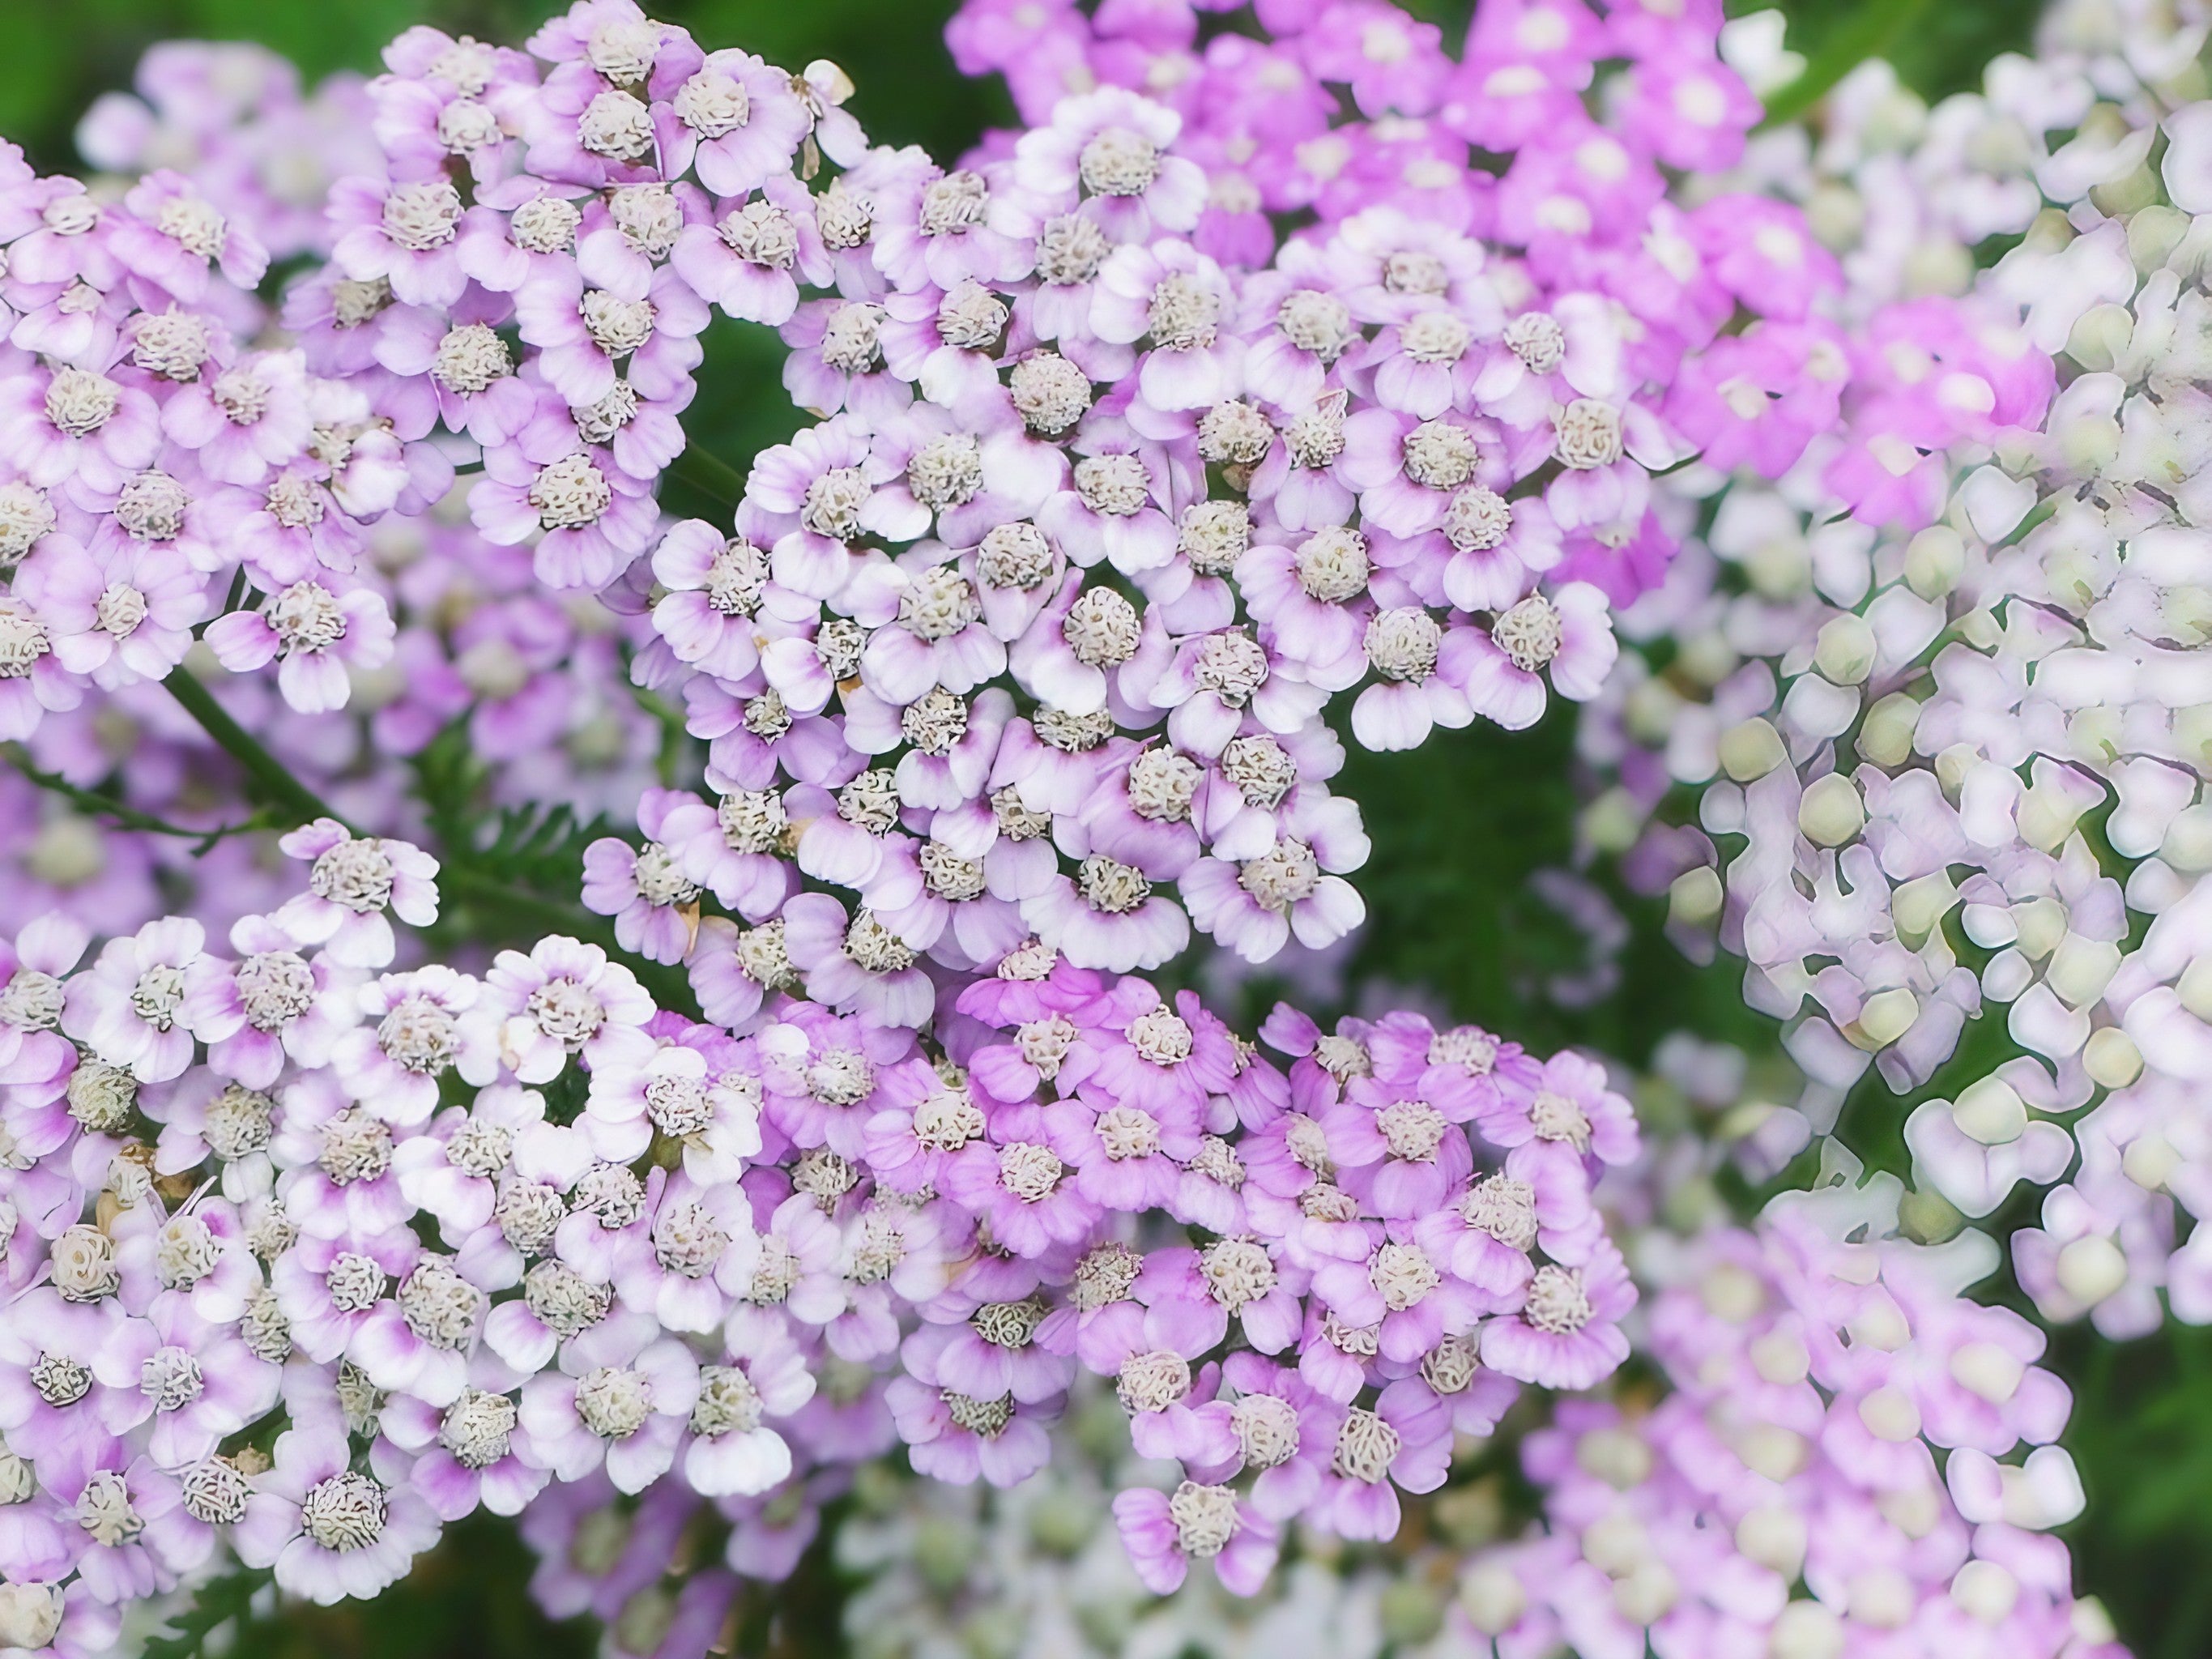 A collection of Achillea Millefolium Pastel Mixed flowers in shades of purple and white